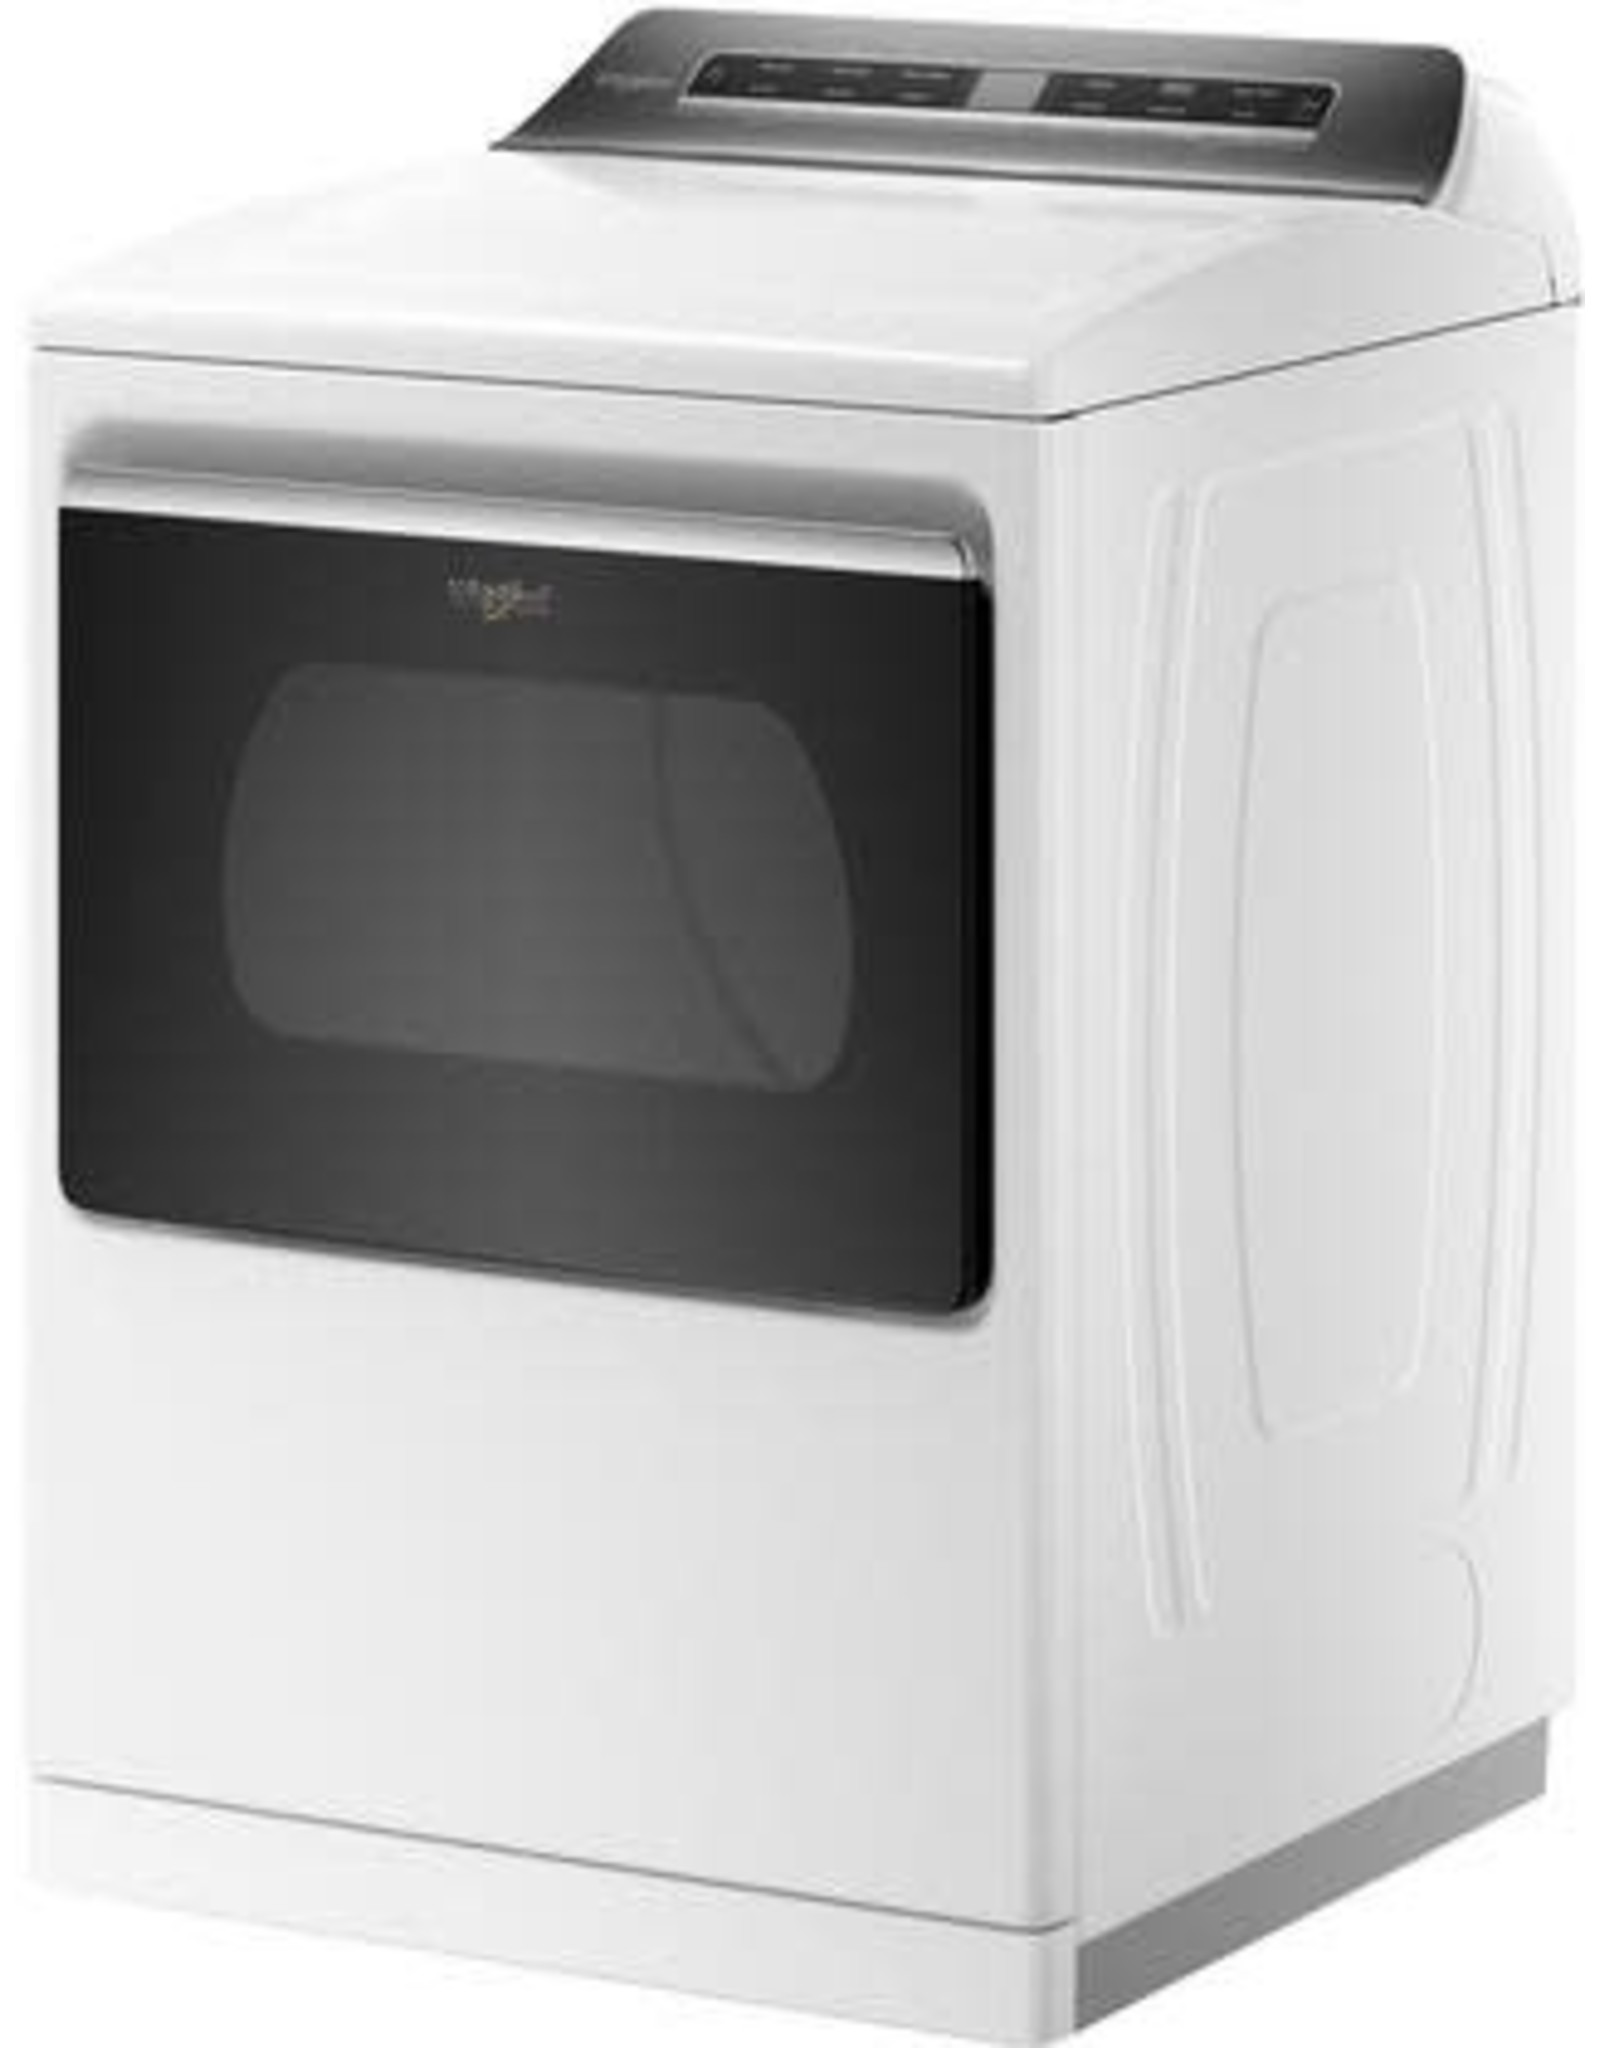 WED8127LW 7.4 cu. ft. White Electric Dryer with Steam and Advanced Moisture Sensing Technology, ENERGY STAR